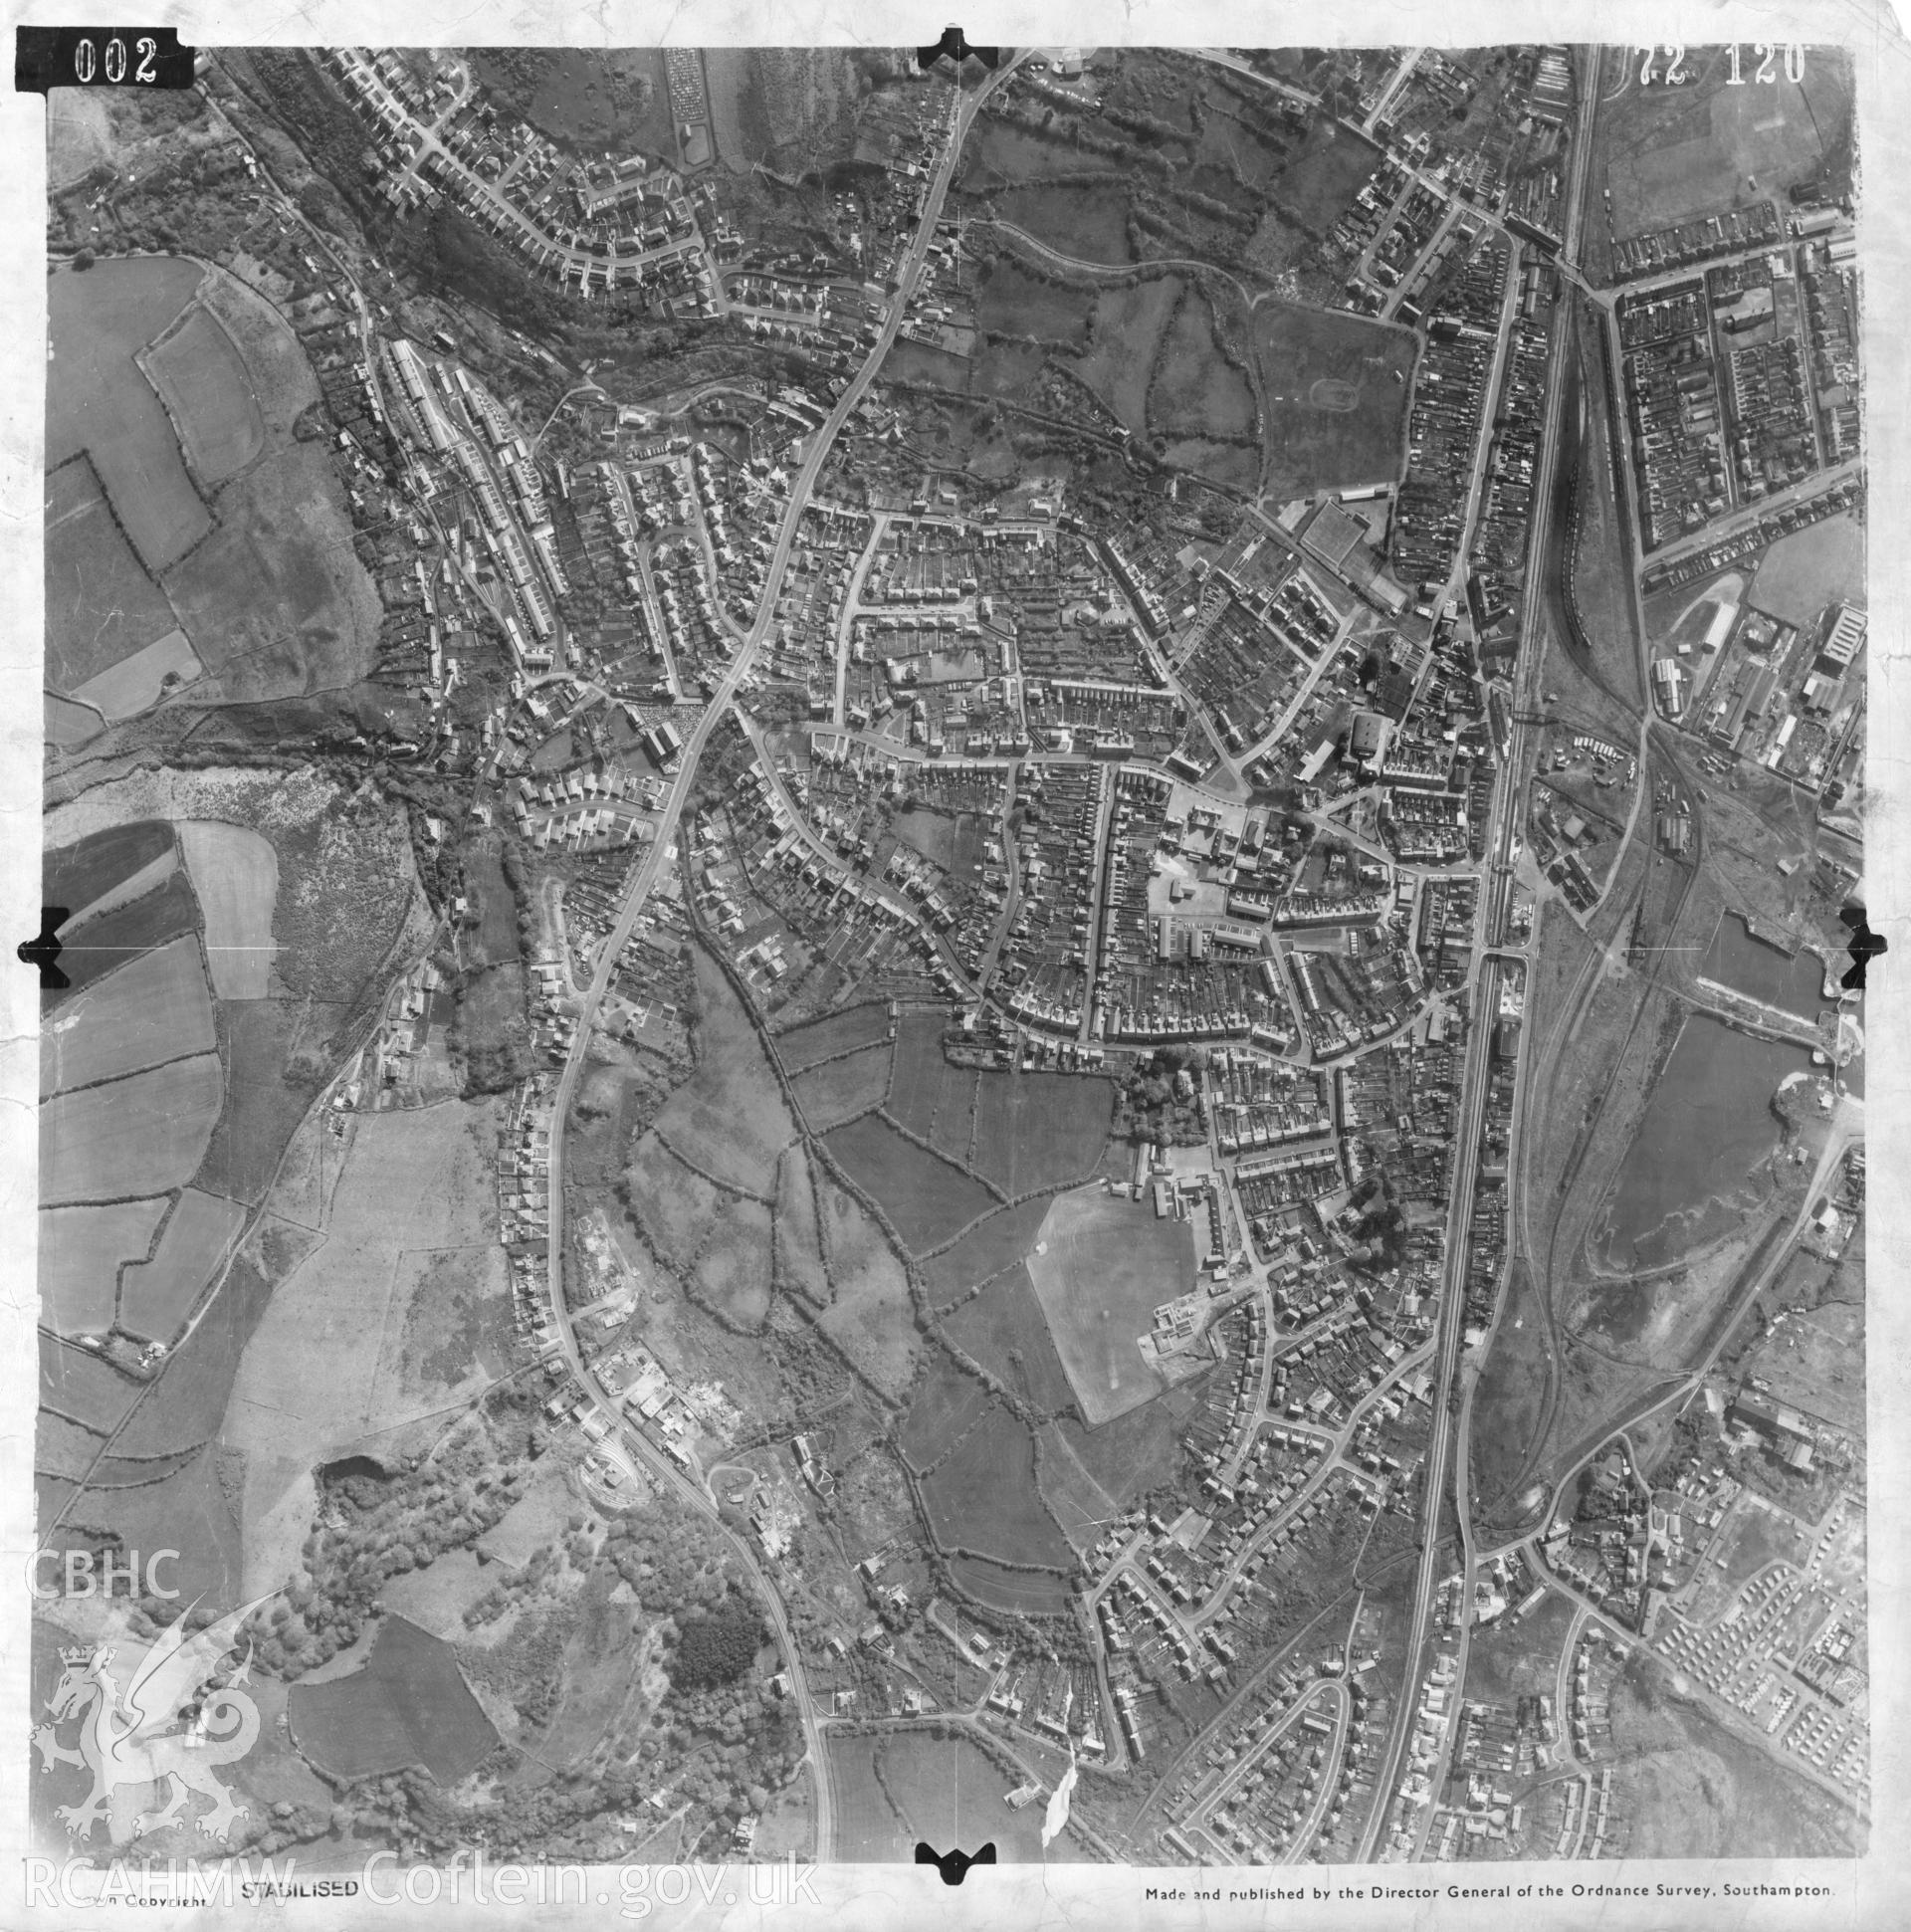 Digitized copy of an aerial photograph showing Burry Port area, taken by Ordnance Survey, 1972.